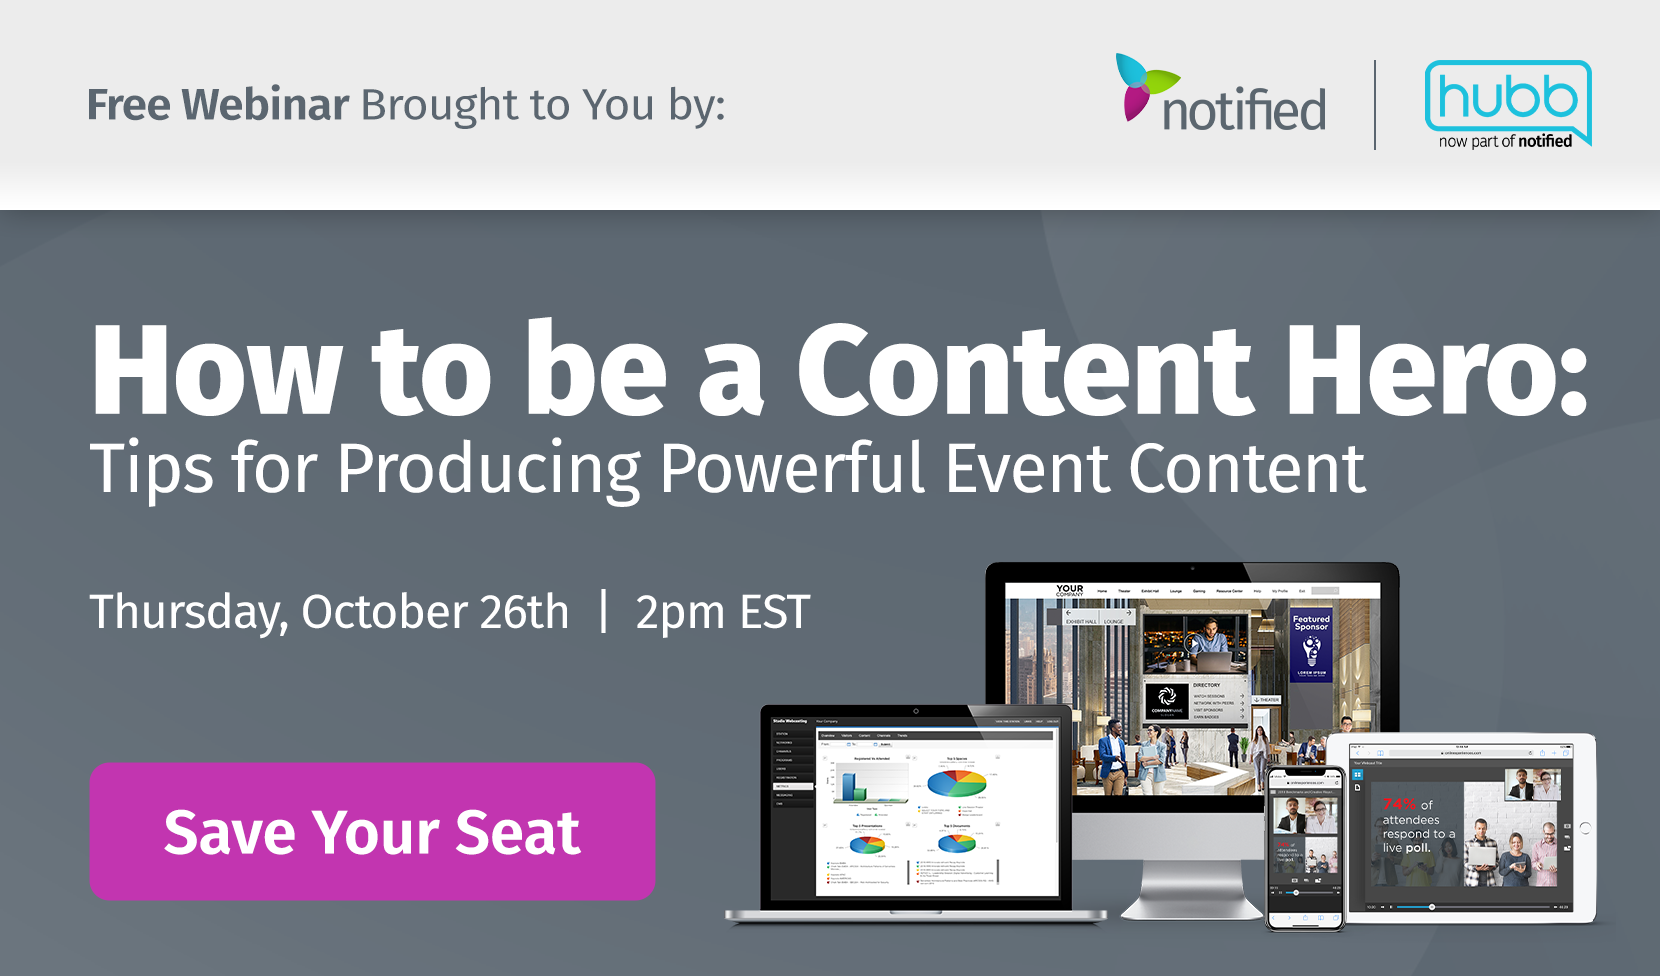 How to be a Content Hero: Tips for Producing Powerful Event Content. Tuesday, October 26th, 2pm EST. Reserve Your seat.